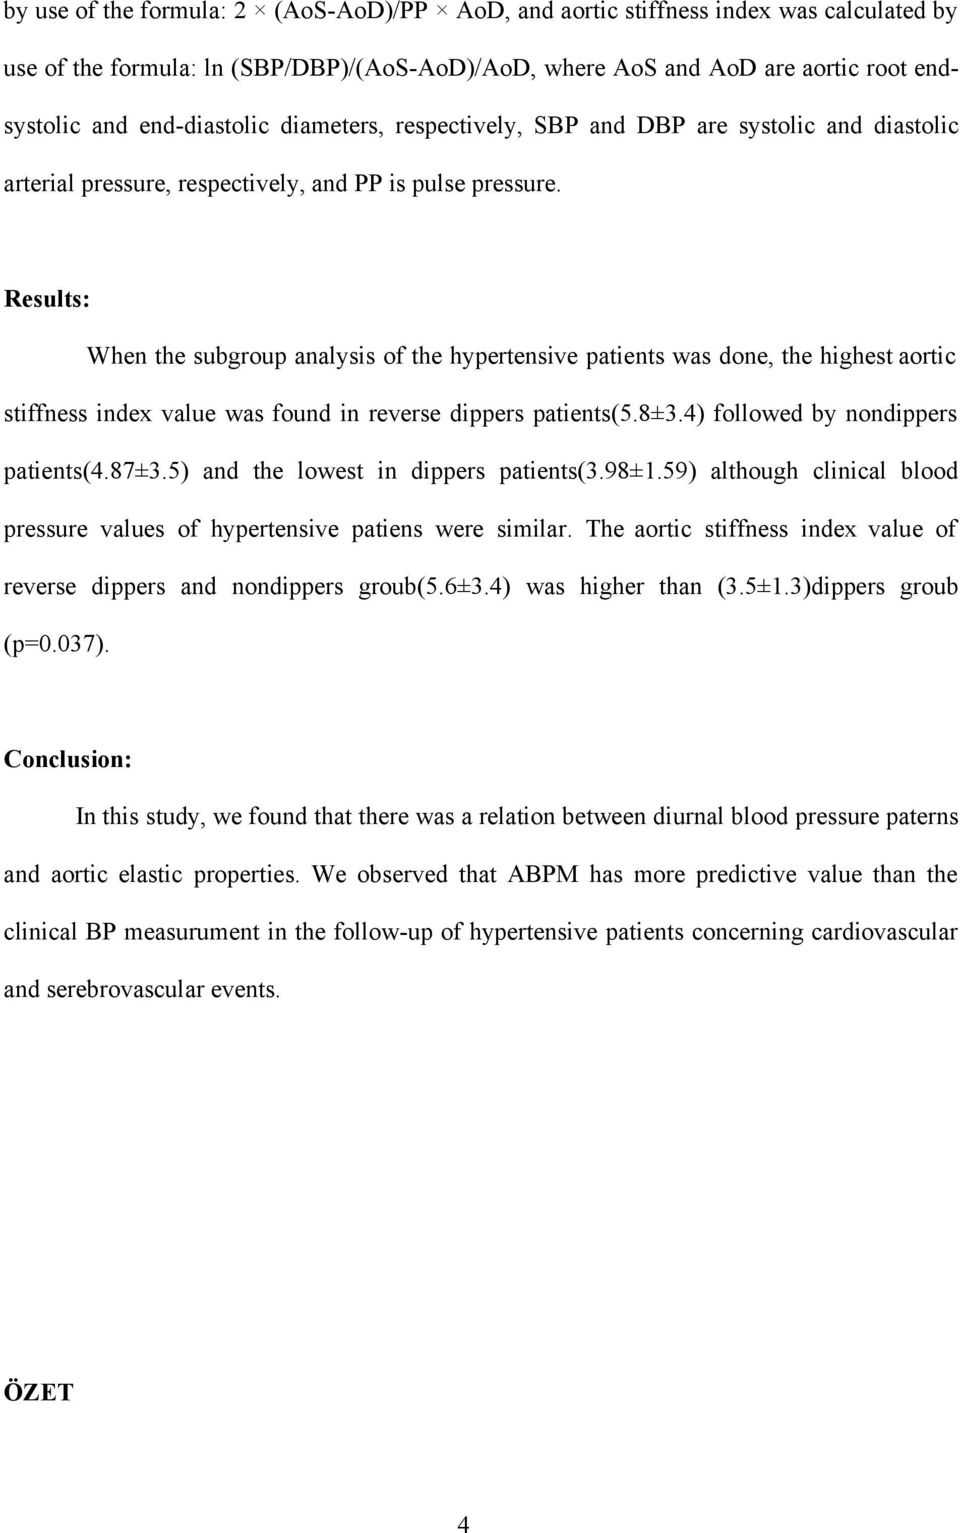 Results: When the subgroup analysis of the hypertensive patients was done, the highest aortic stiffness index value was found in reverse dippers patients(5.8±3.4) followed by nondippers patients(4.